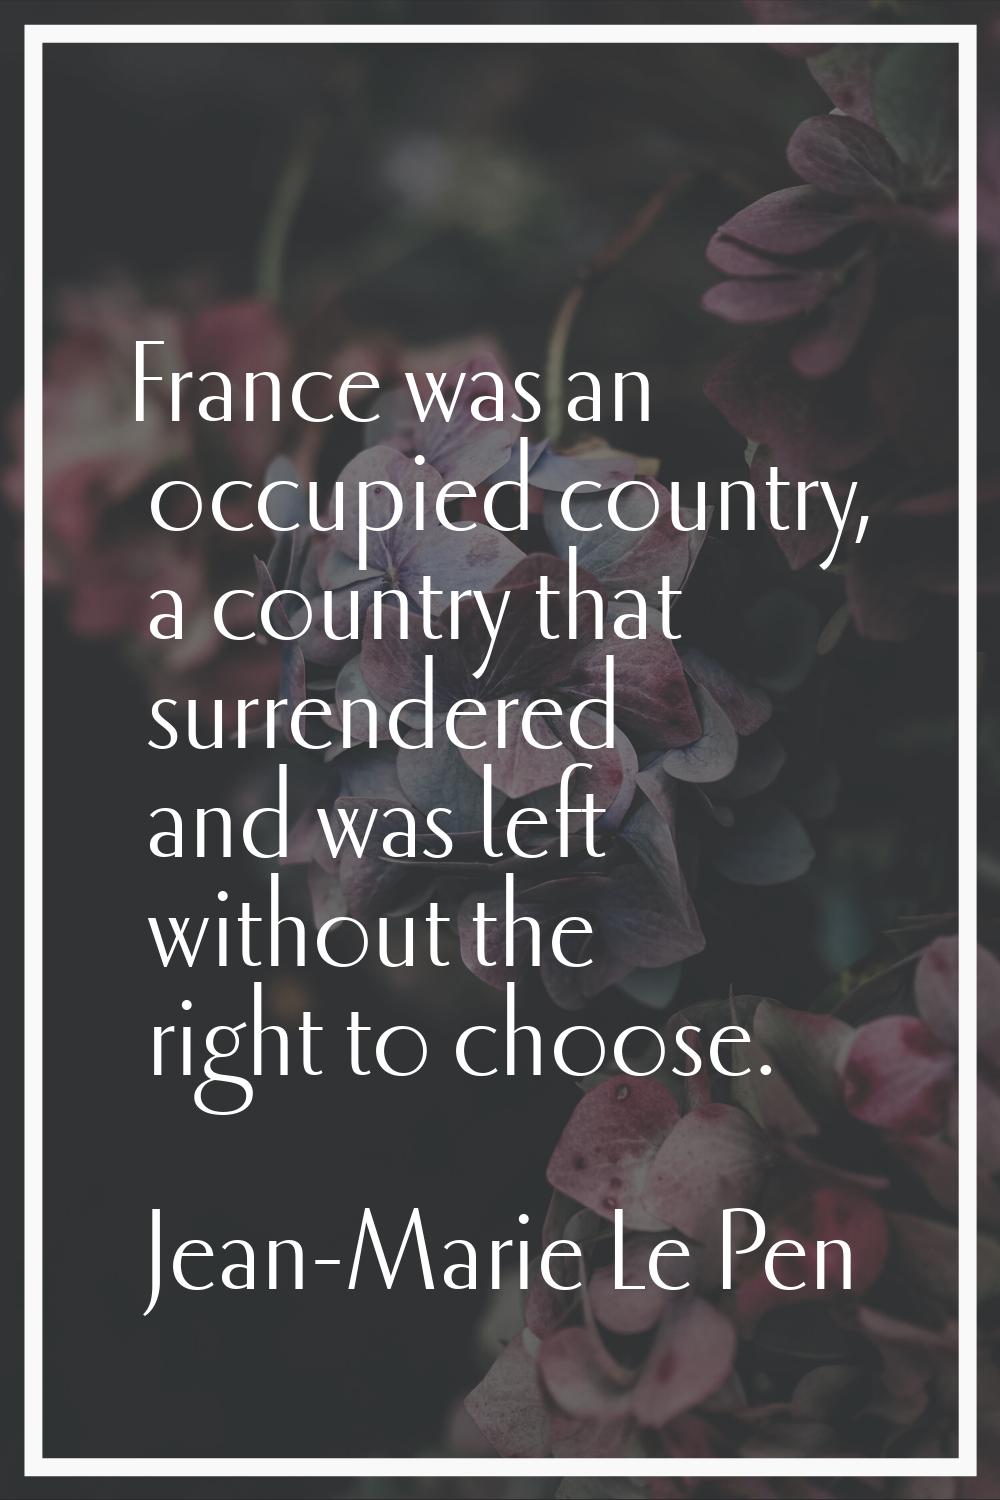 France was an occupied country, a country that surrendered and was left without the right to choose